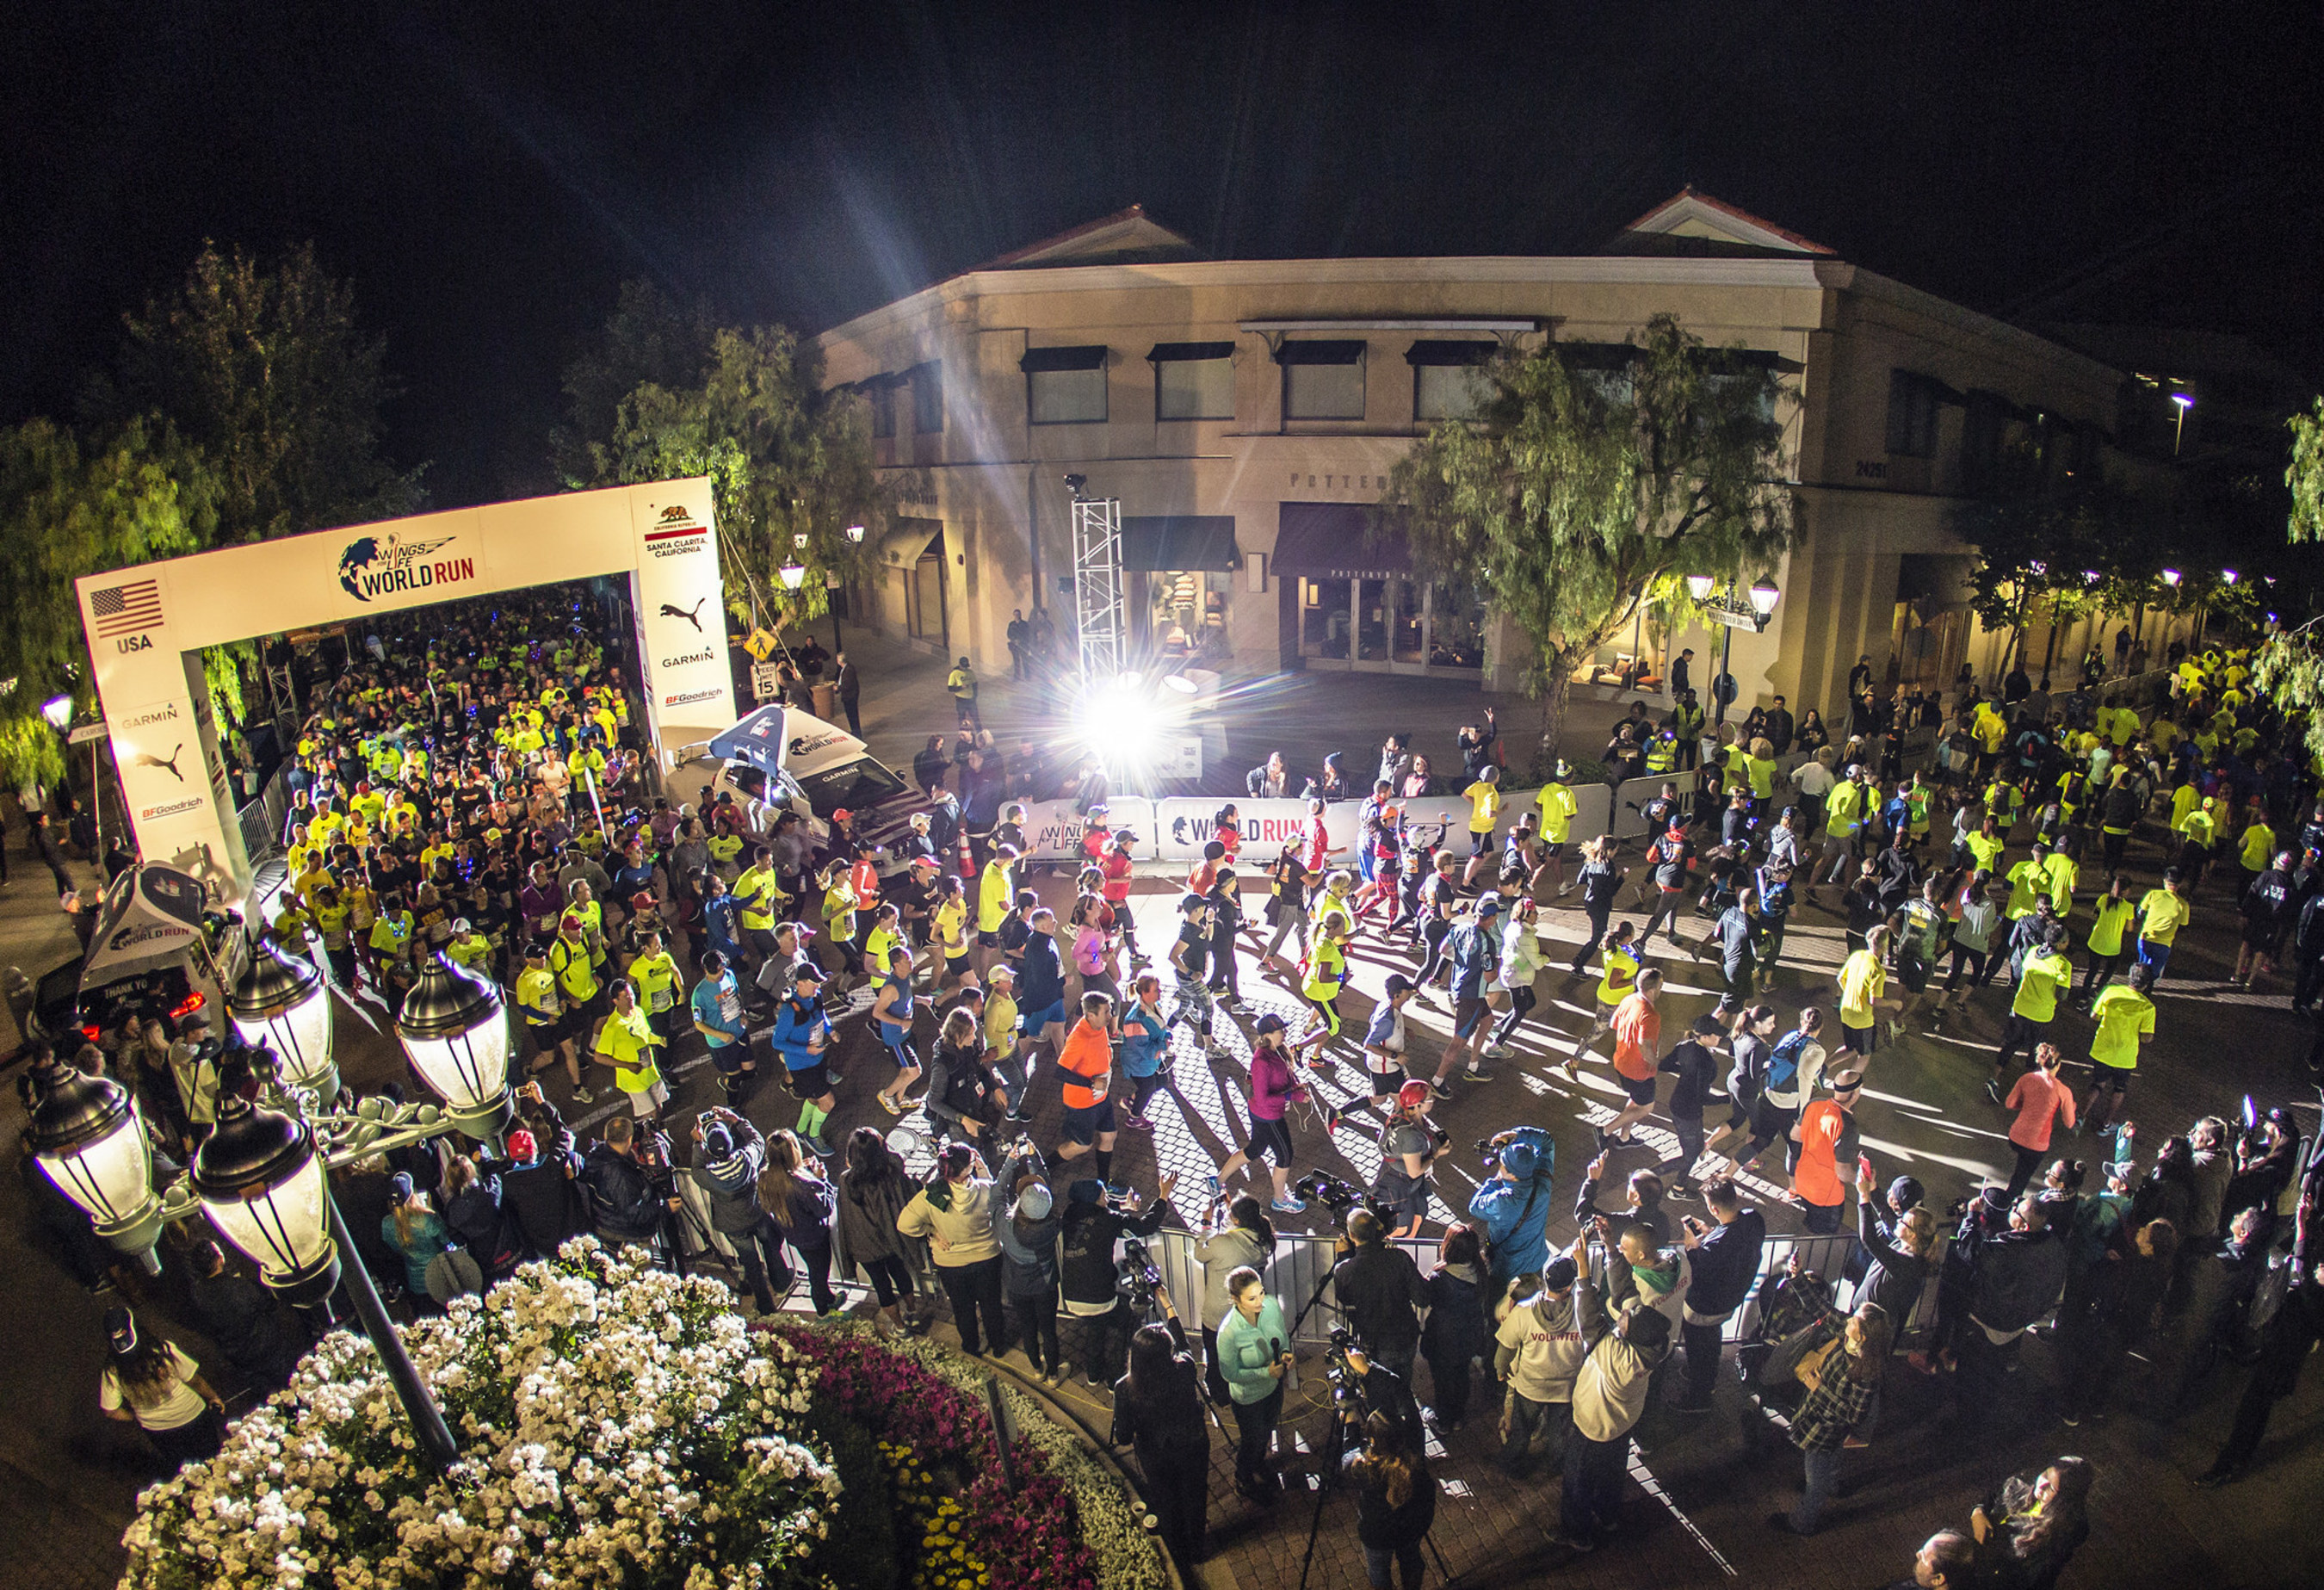 Participants in the Wings for Life World Run take off Sunday morning in Santa Clarita, Calif., one of 34 locations around the world shining a light on spinal cord injury research.